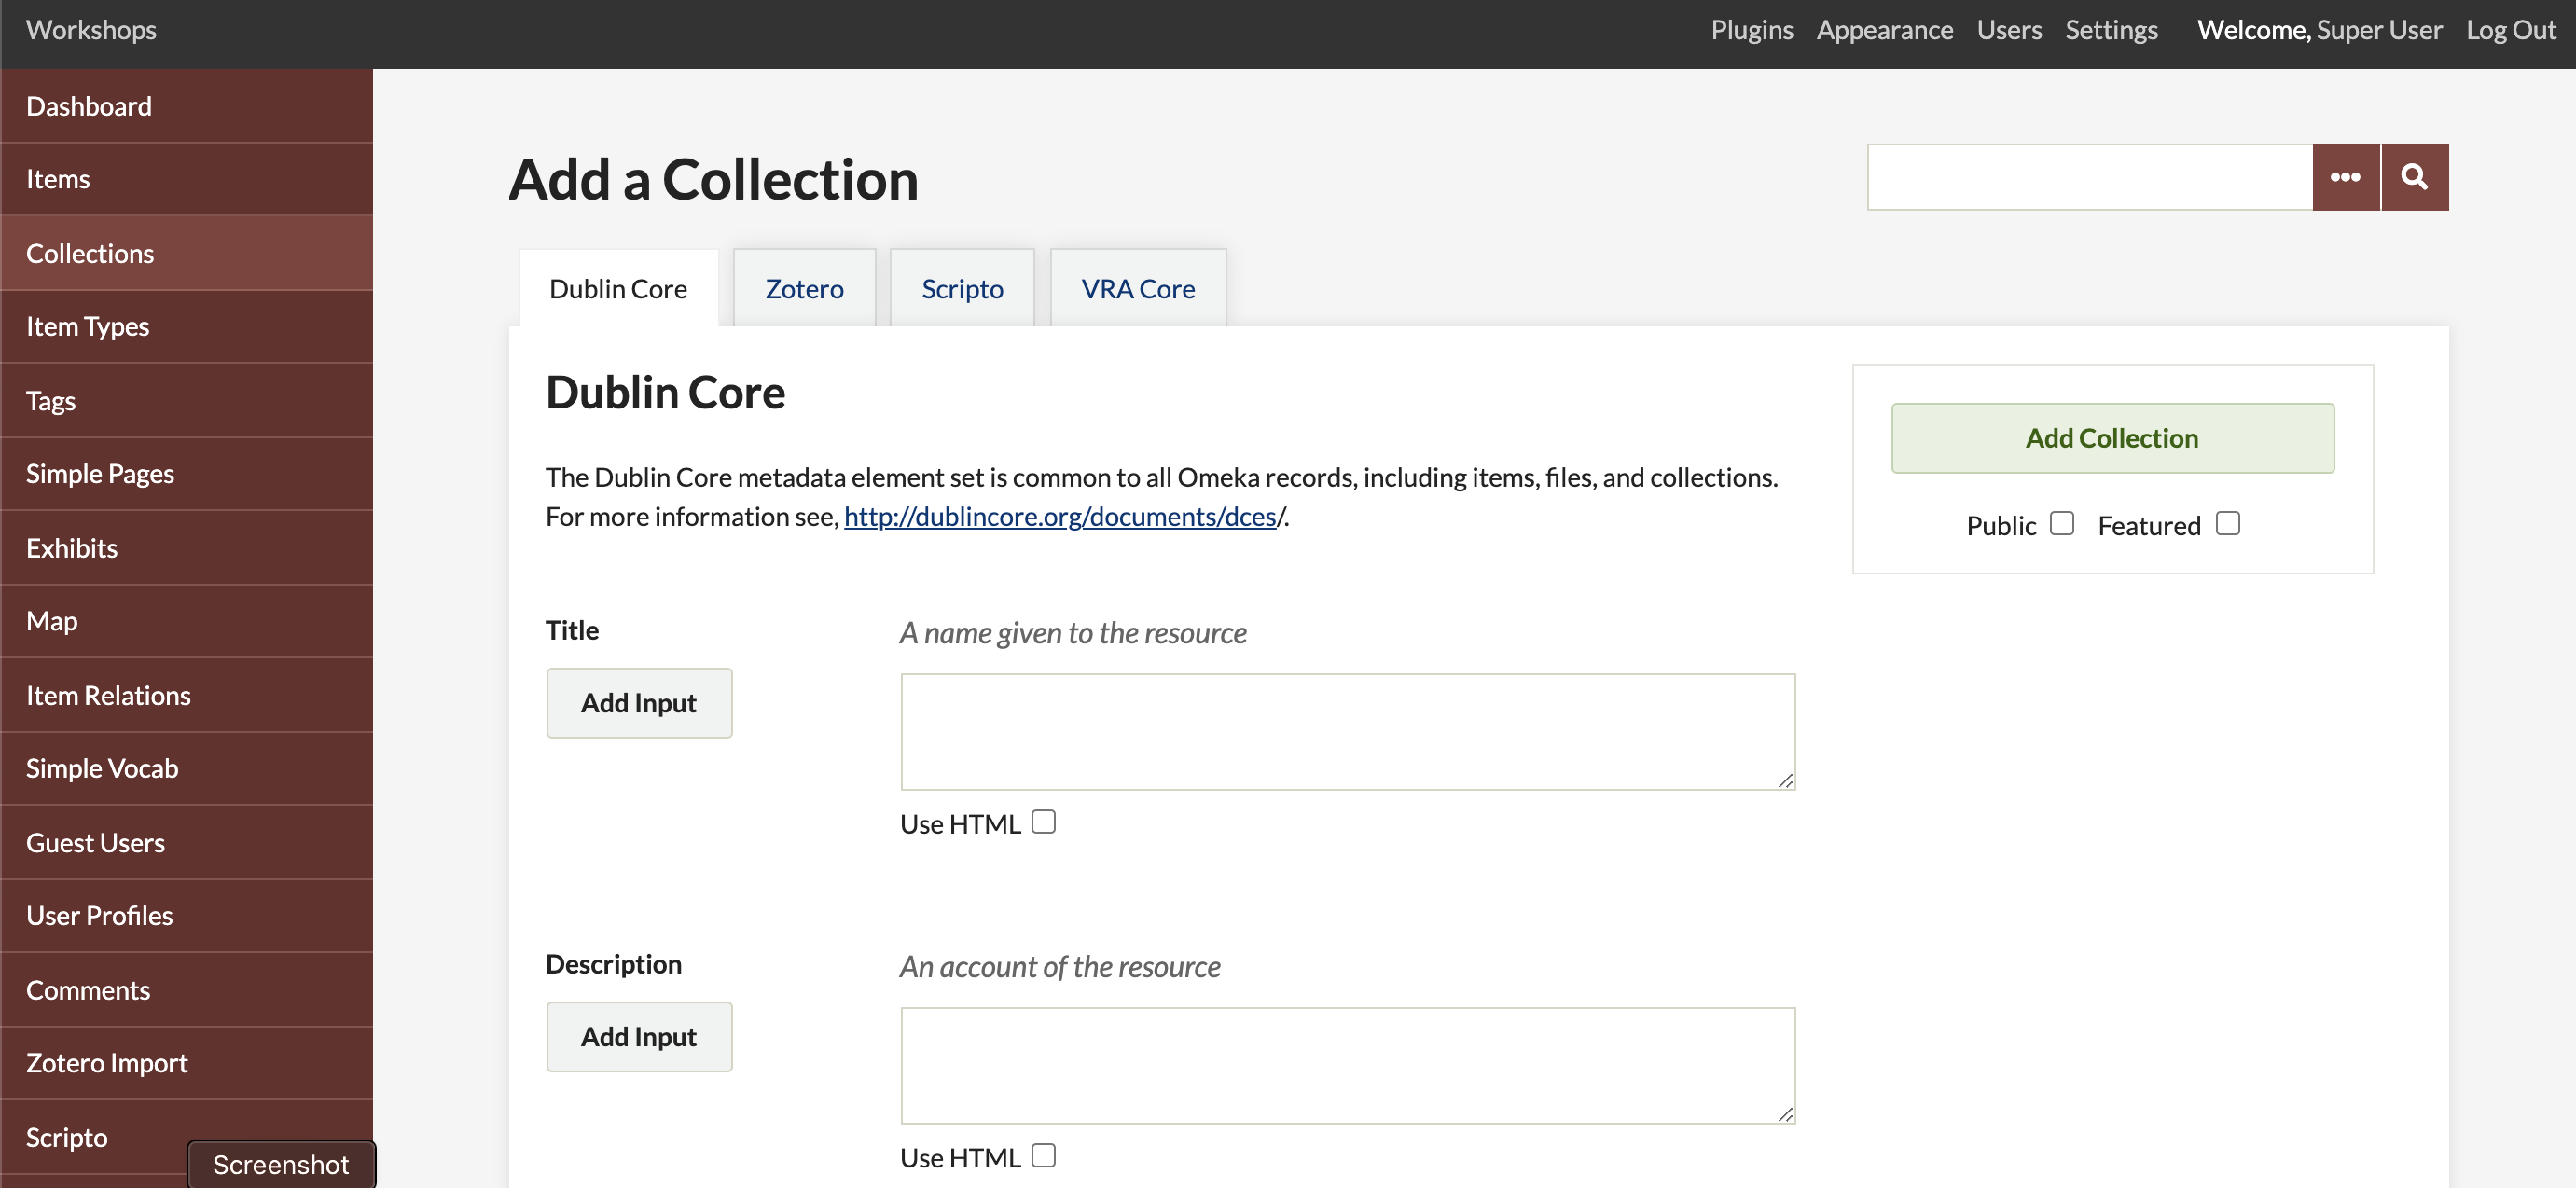 A screenshot of the Add a Collection page, with no metadata entered